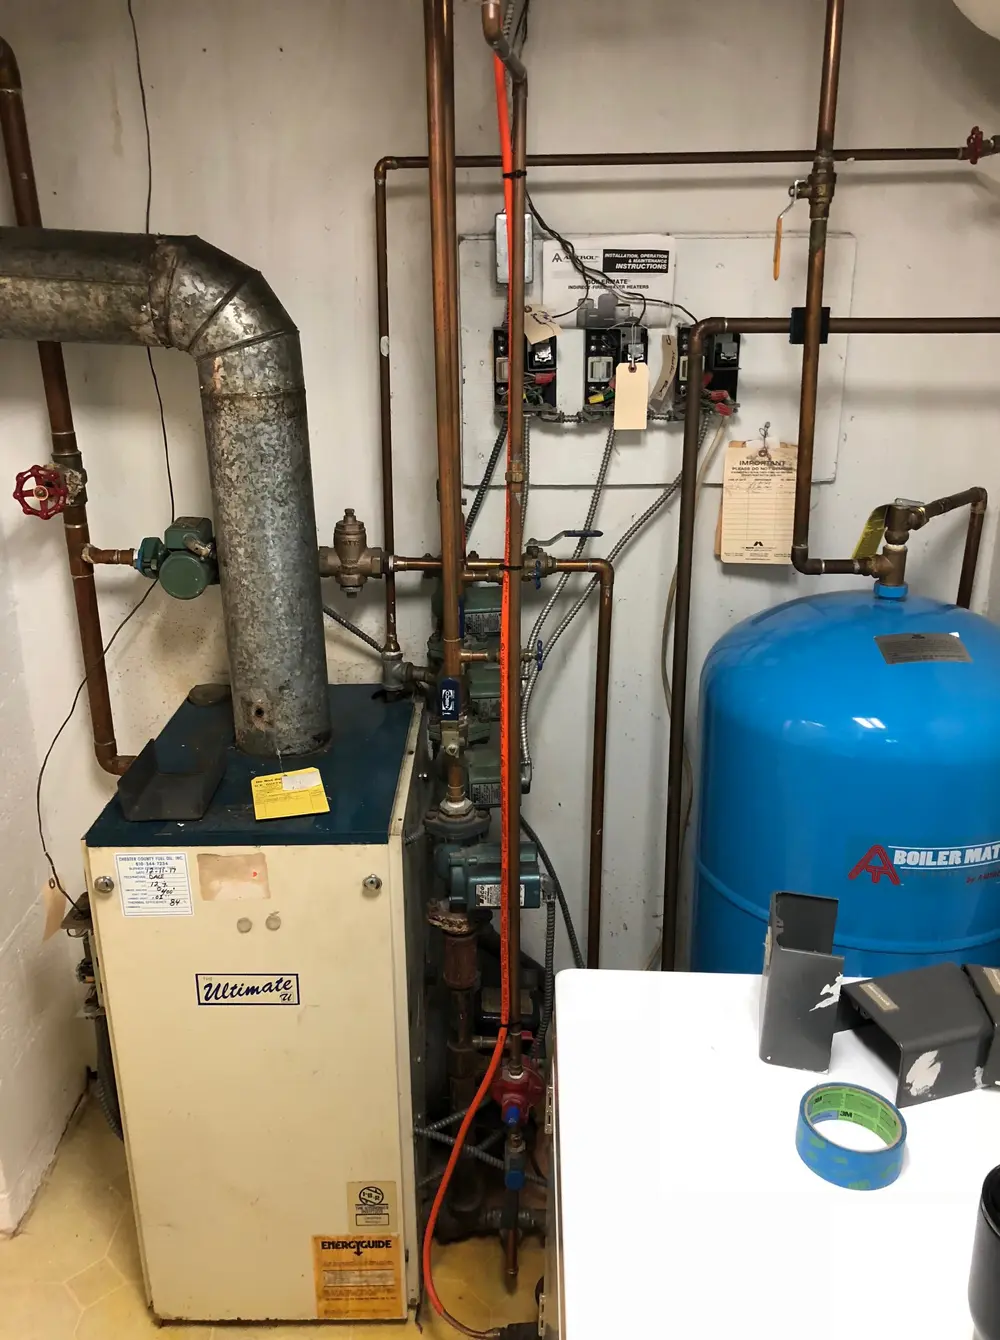 hvac install chester county, hvac west chester pa, hvac company chester county, hvac repair west chester pa, air conditioning repair west chester pa, heating air conditioning, heating cooling, service, heating, cooling